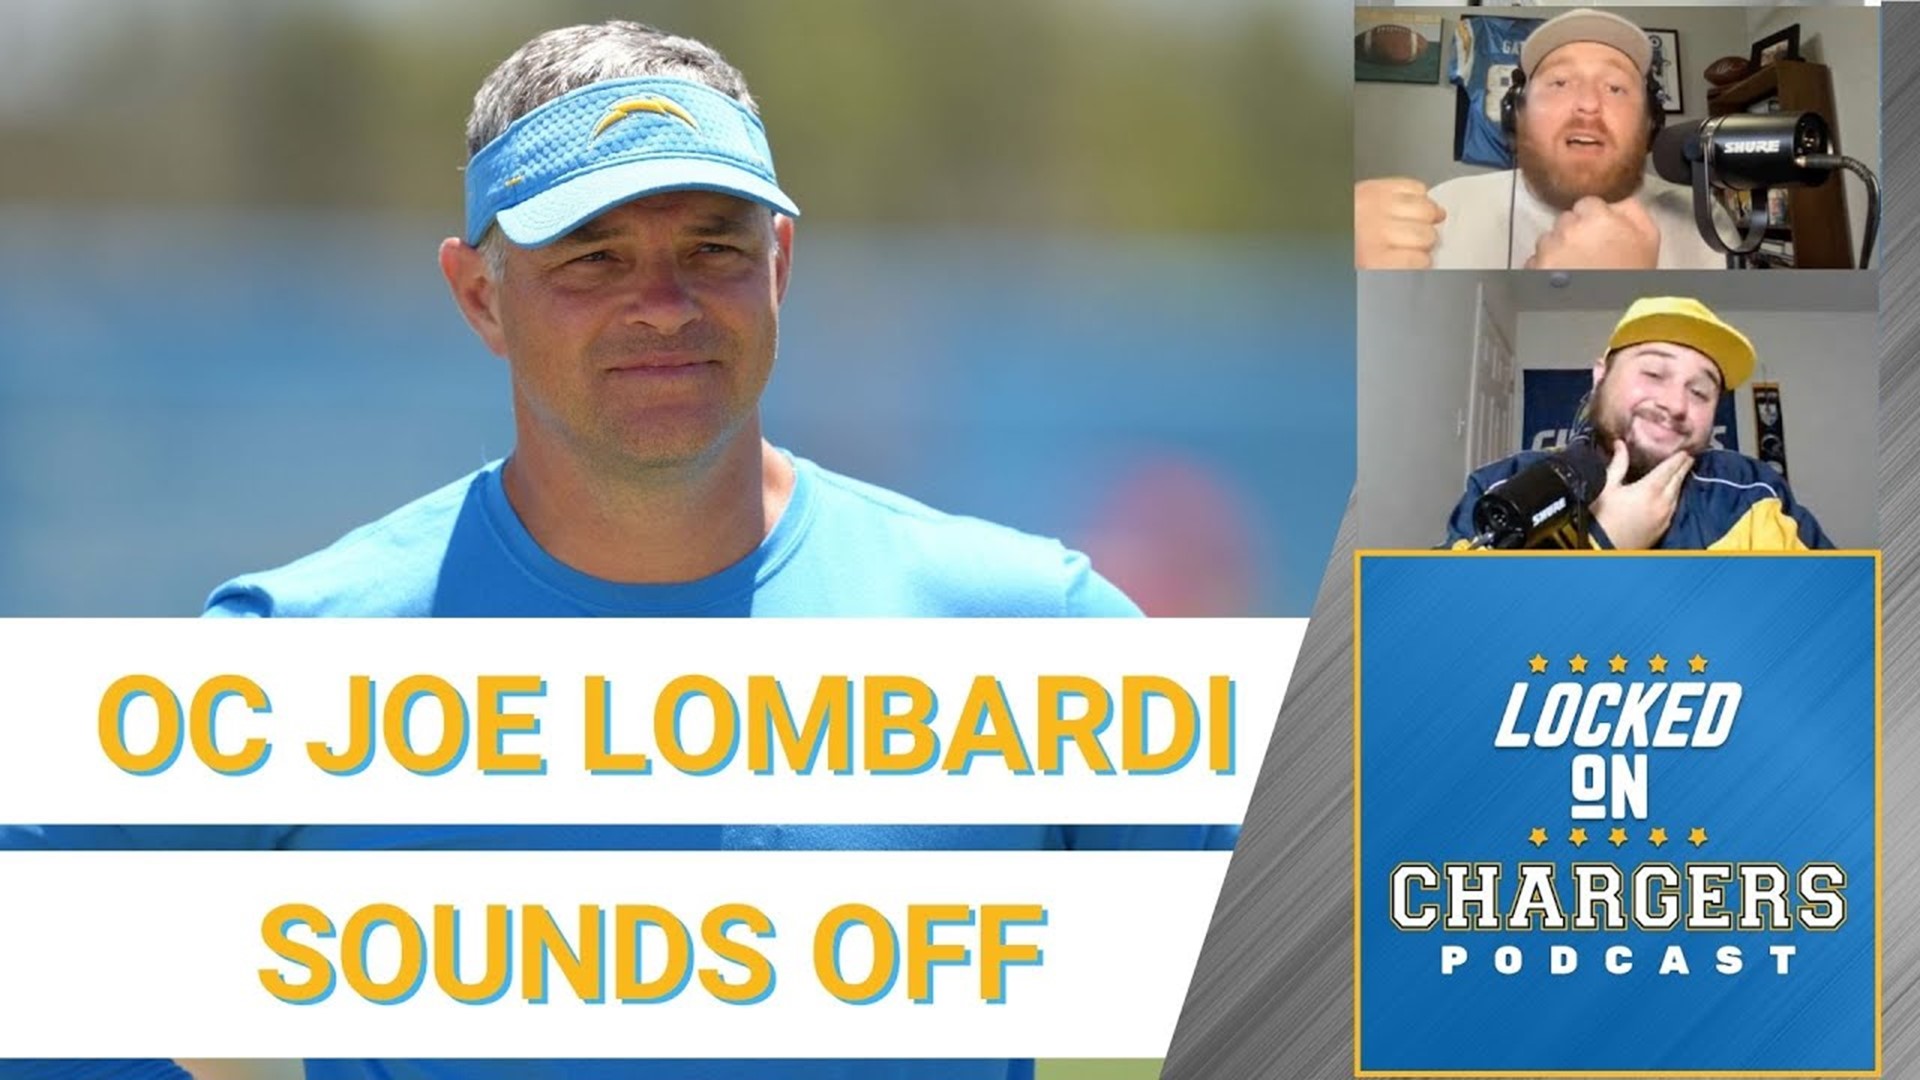 Joe Lombardi spoke to the media after OTAs and touched on a few topics including Justin Herbert, new offensive line coach & first round draft pick Zion Johnson.